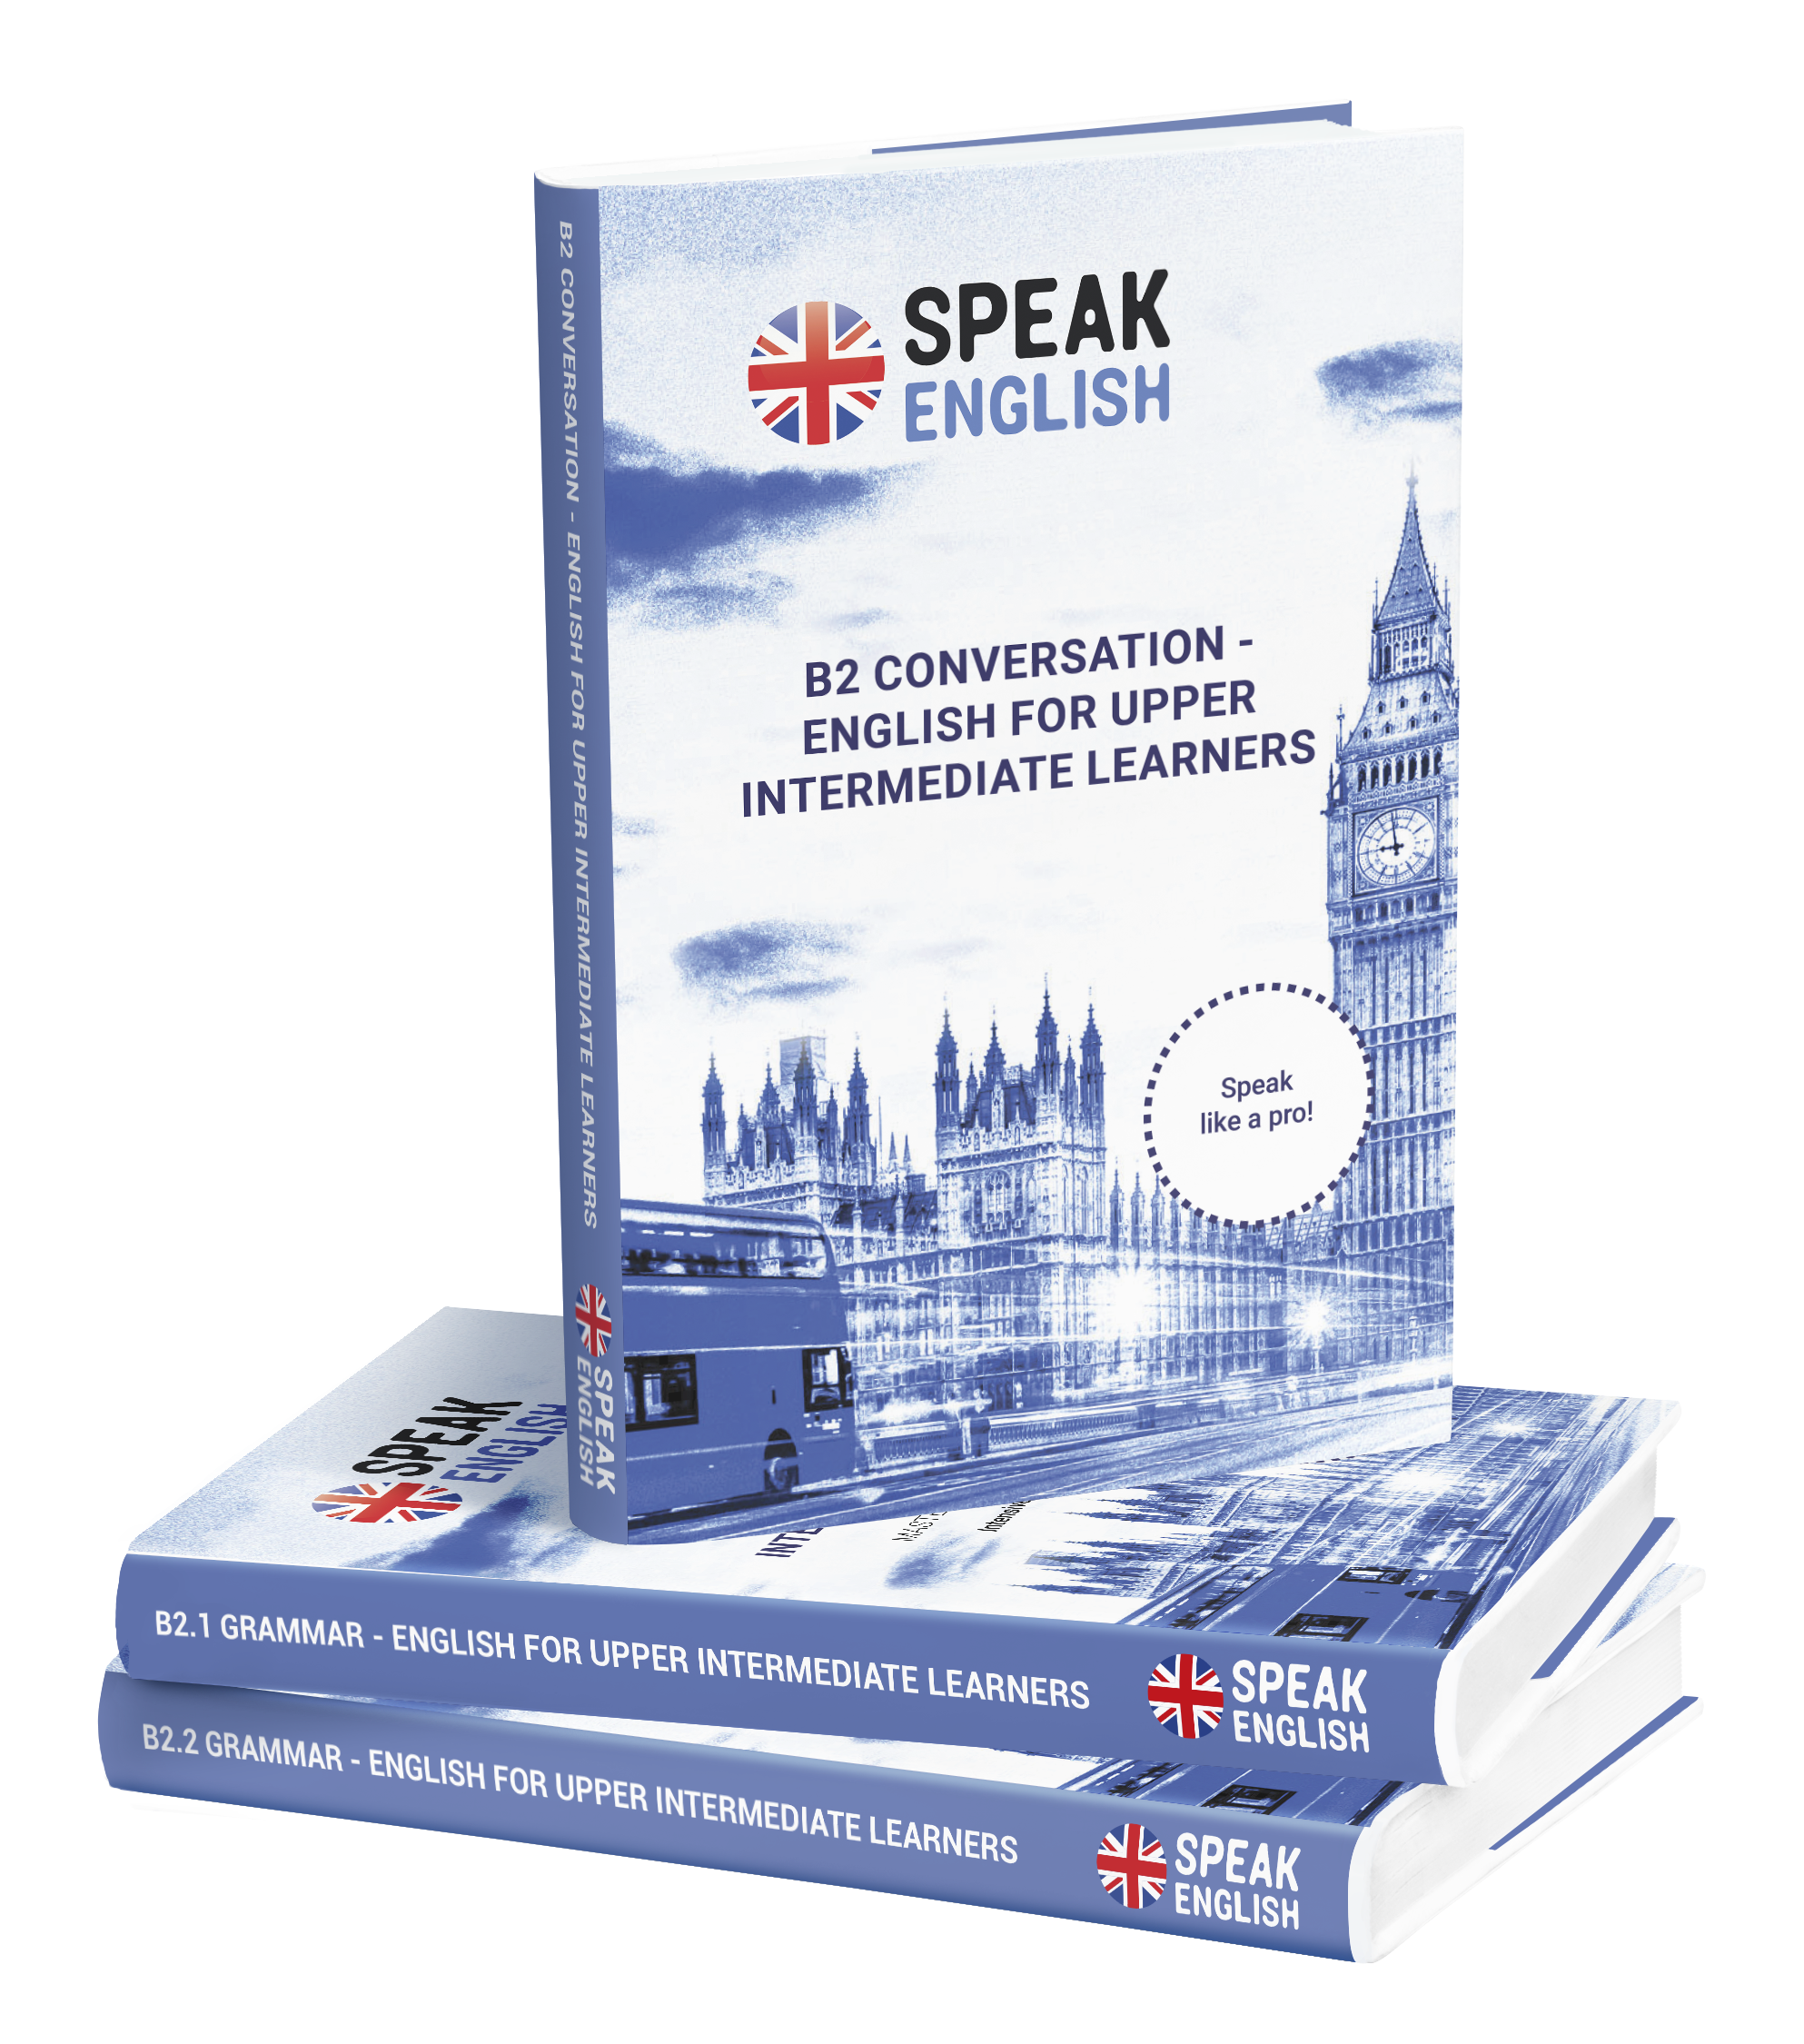 B2 level English course with personal follow up from the teacher and books included in the price